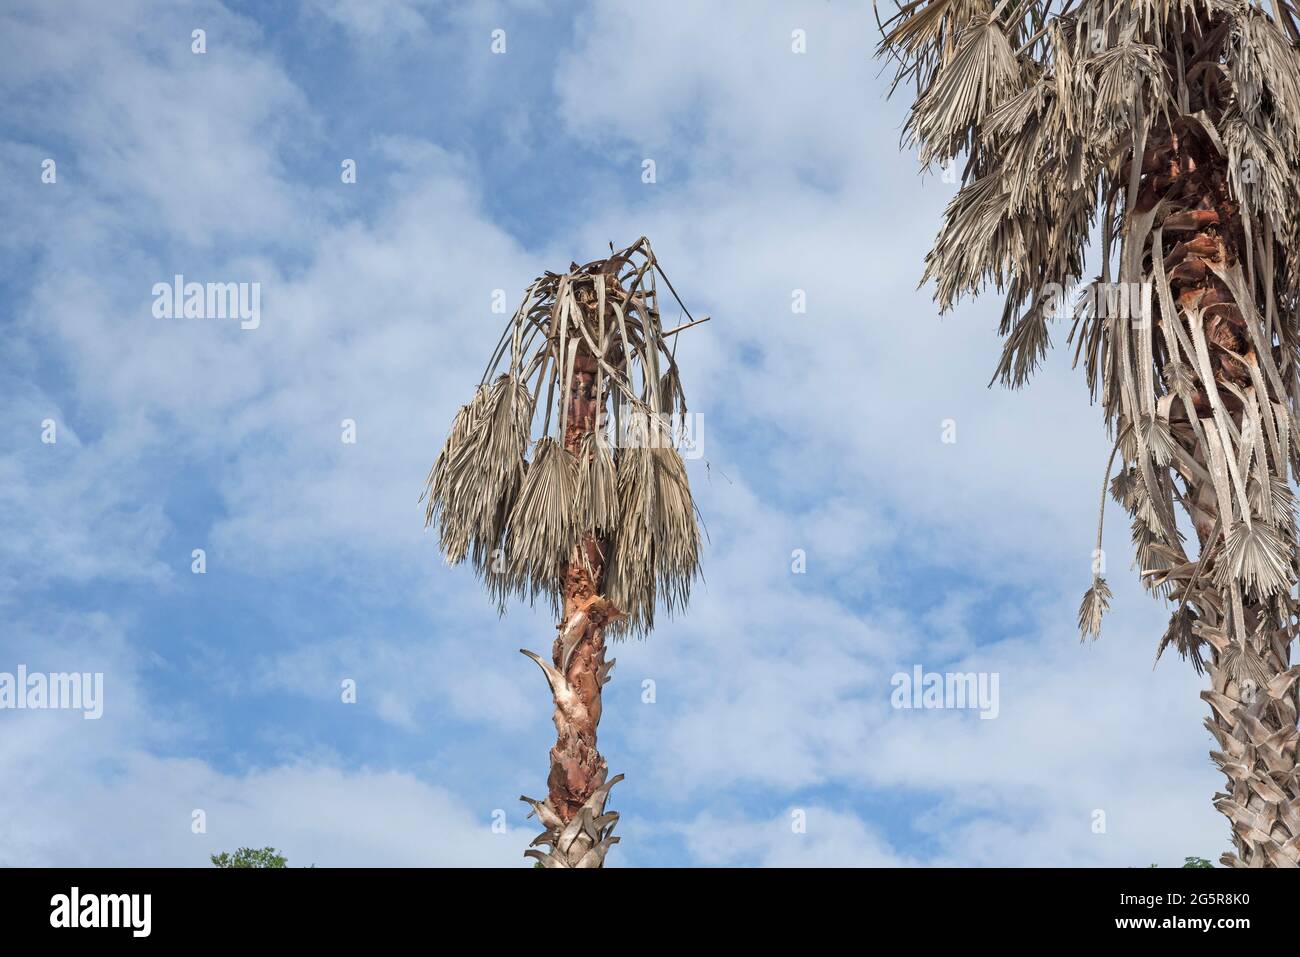 Sabal Palm trees in Alachua, Florida afflicted with Lethal Bronzing disease. Stock Photo